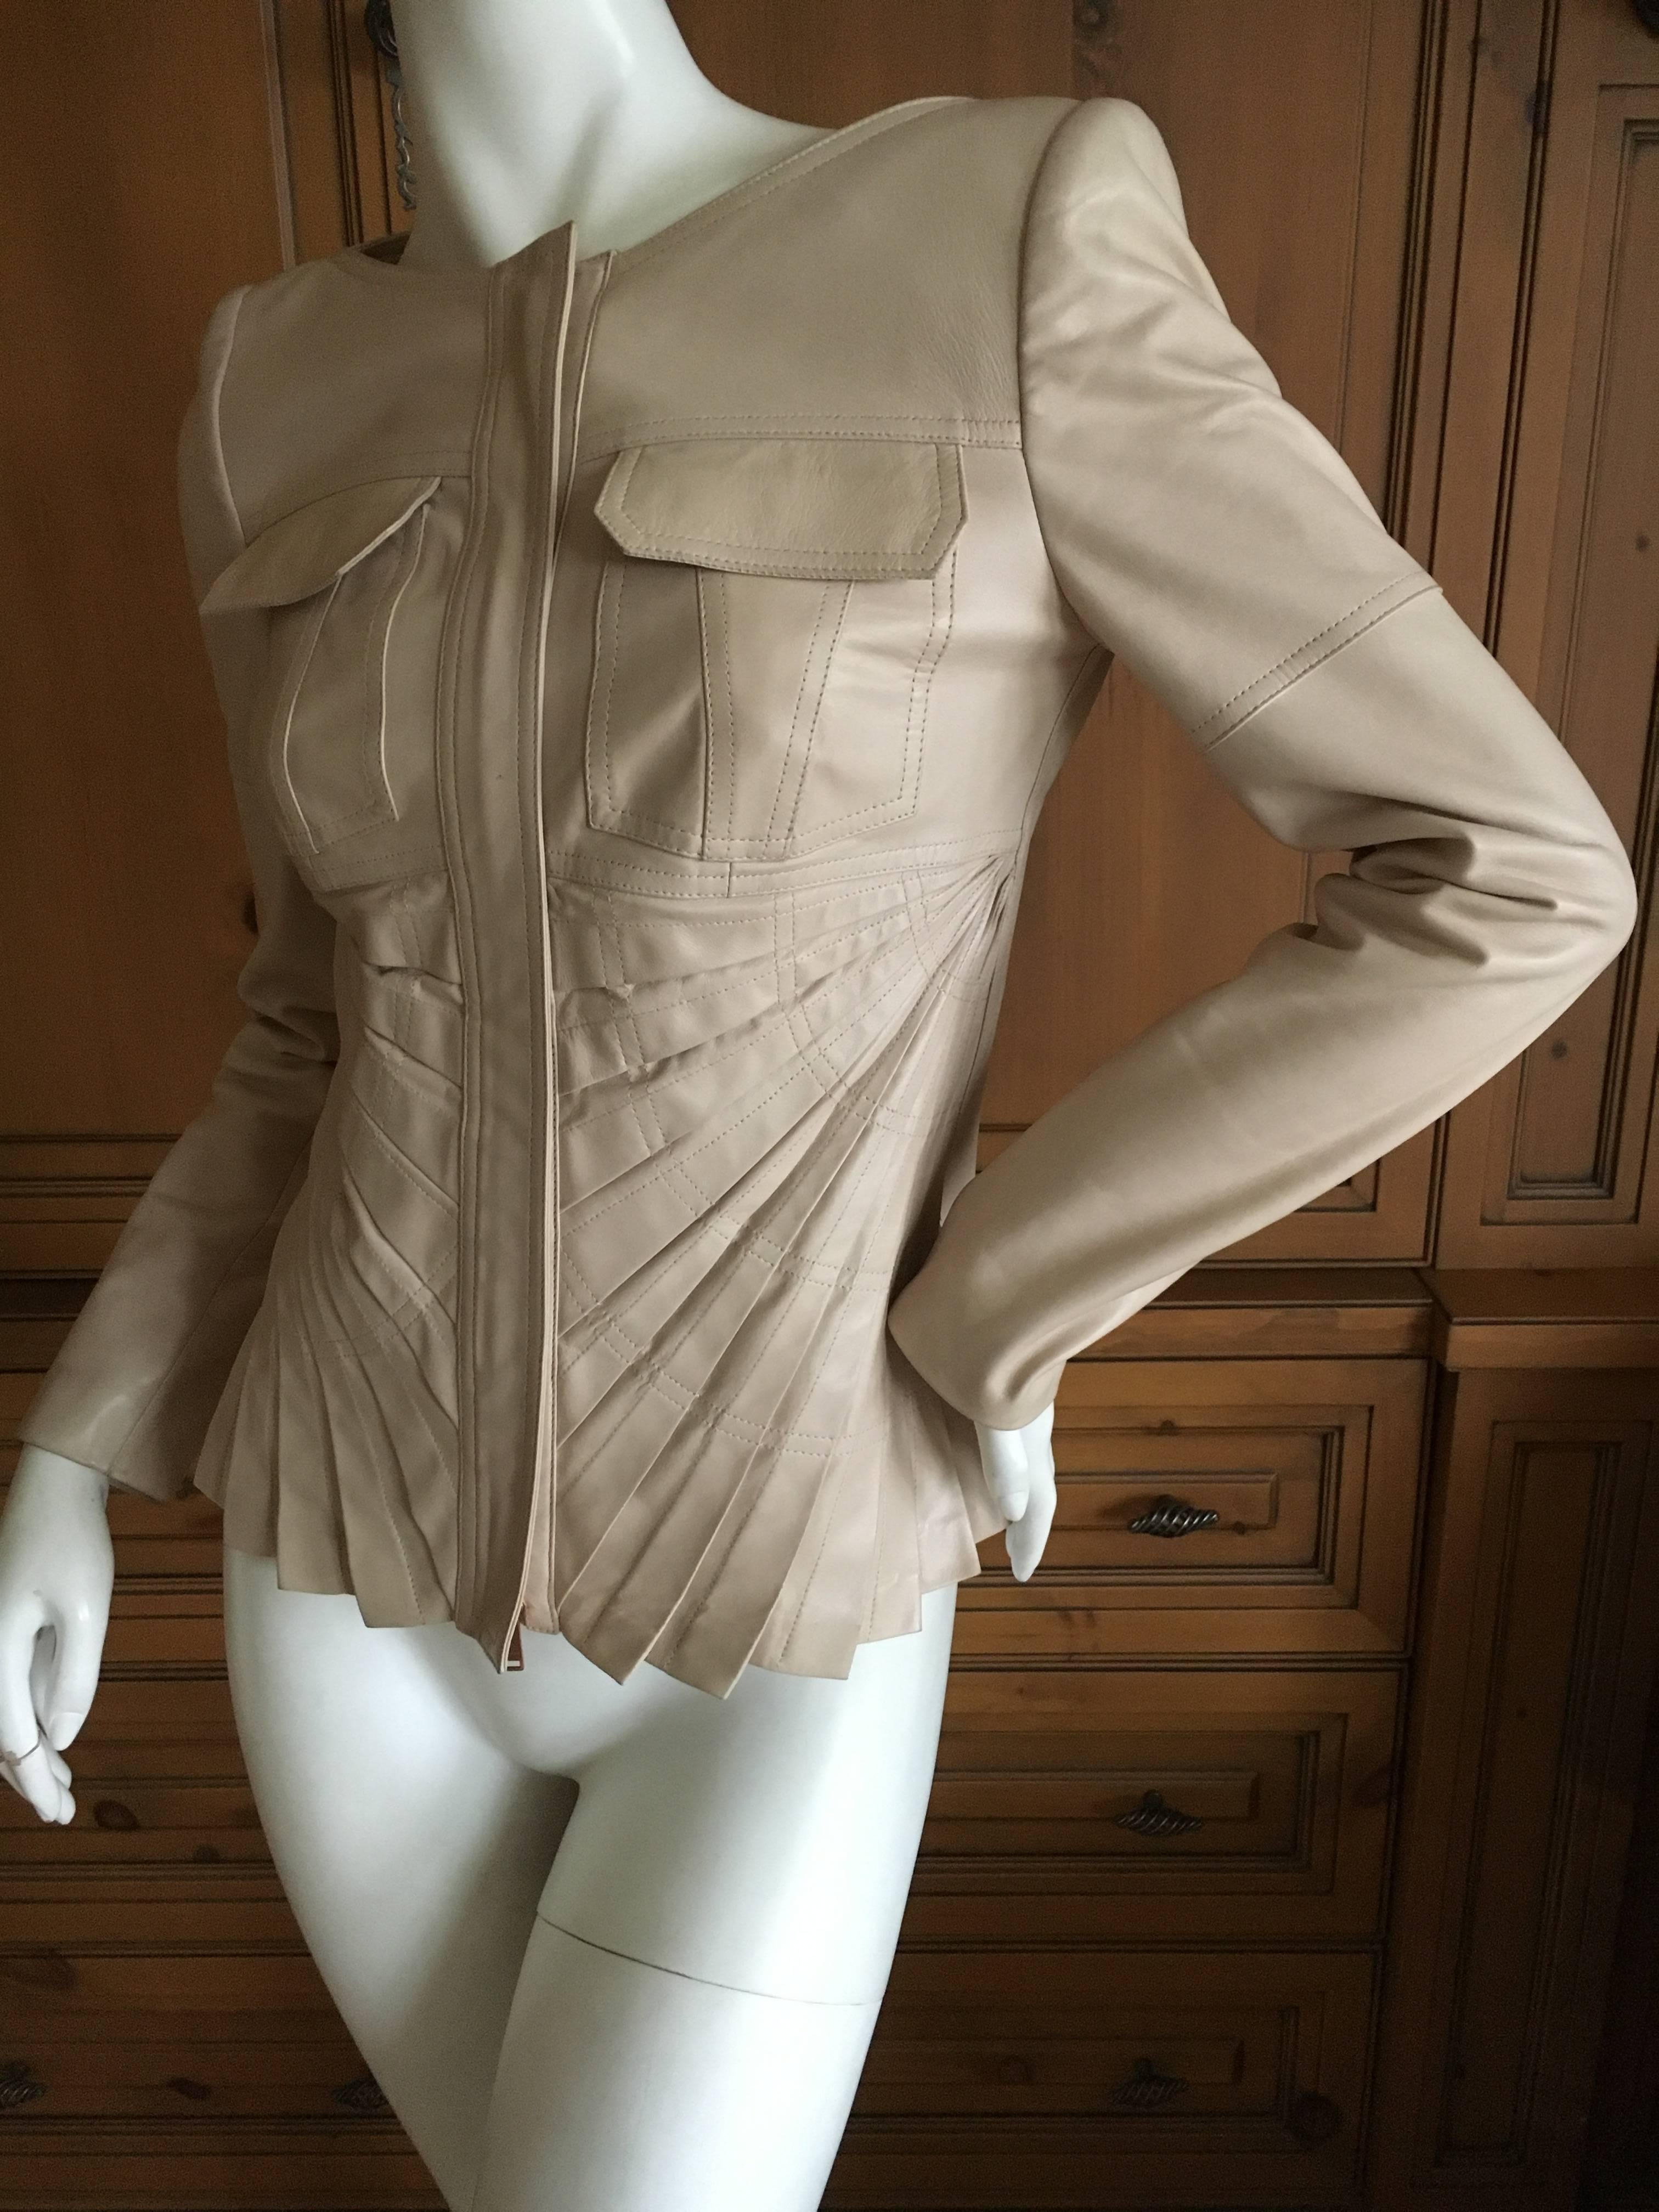 Gucci by Tom Ford Fan Pleat Leather Jacket In Excellent Condition For Sale In Cloverdale, CA